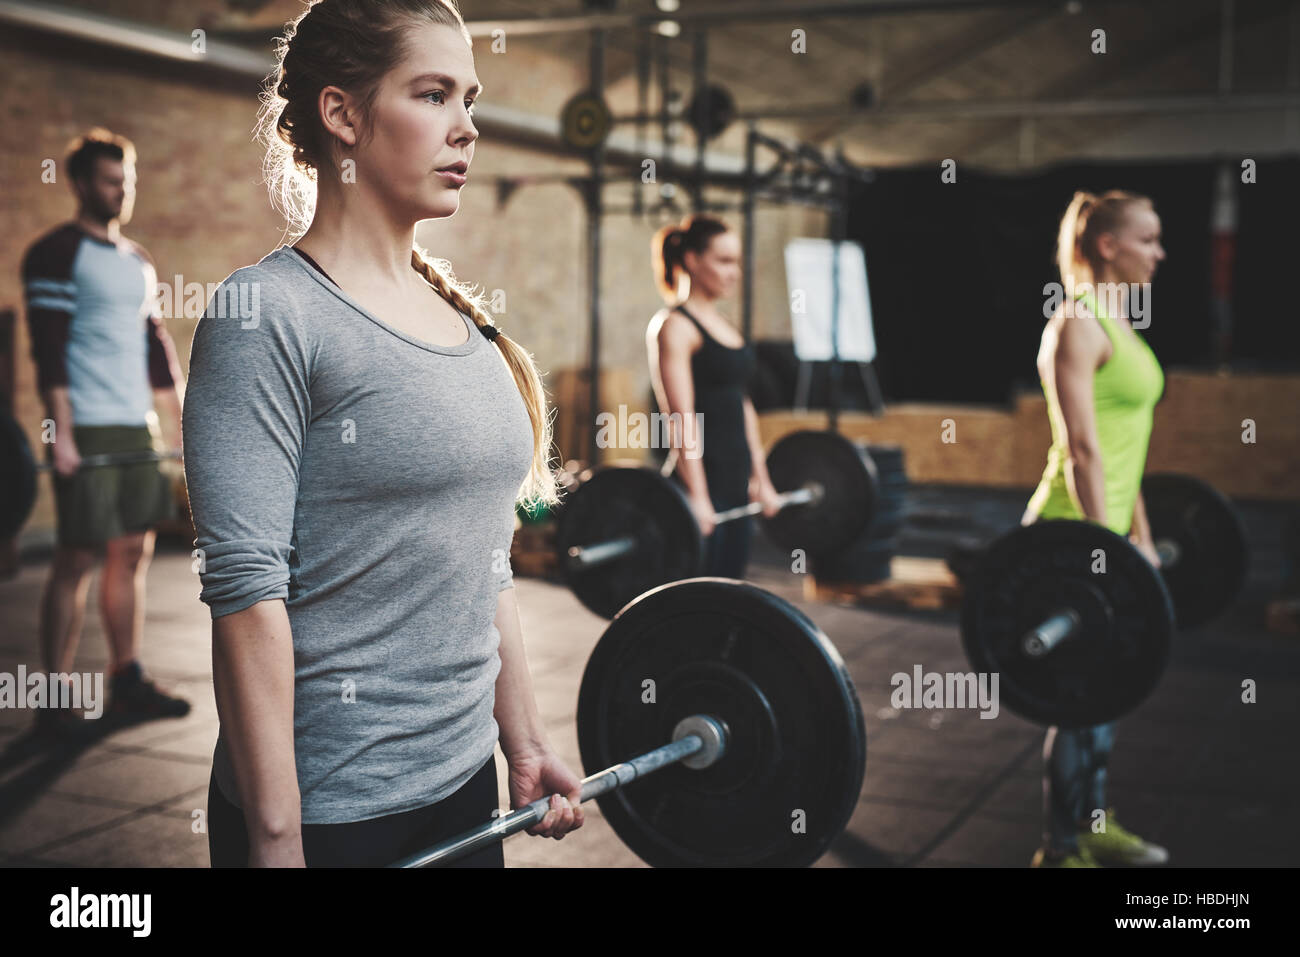 Serious muscular young woman with ponytail and gray shirt performing dead lift barbell exercises with three other trainees Stock Photo